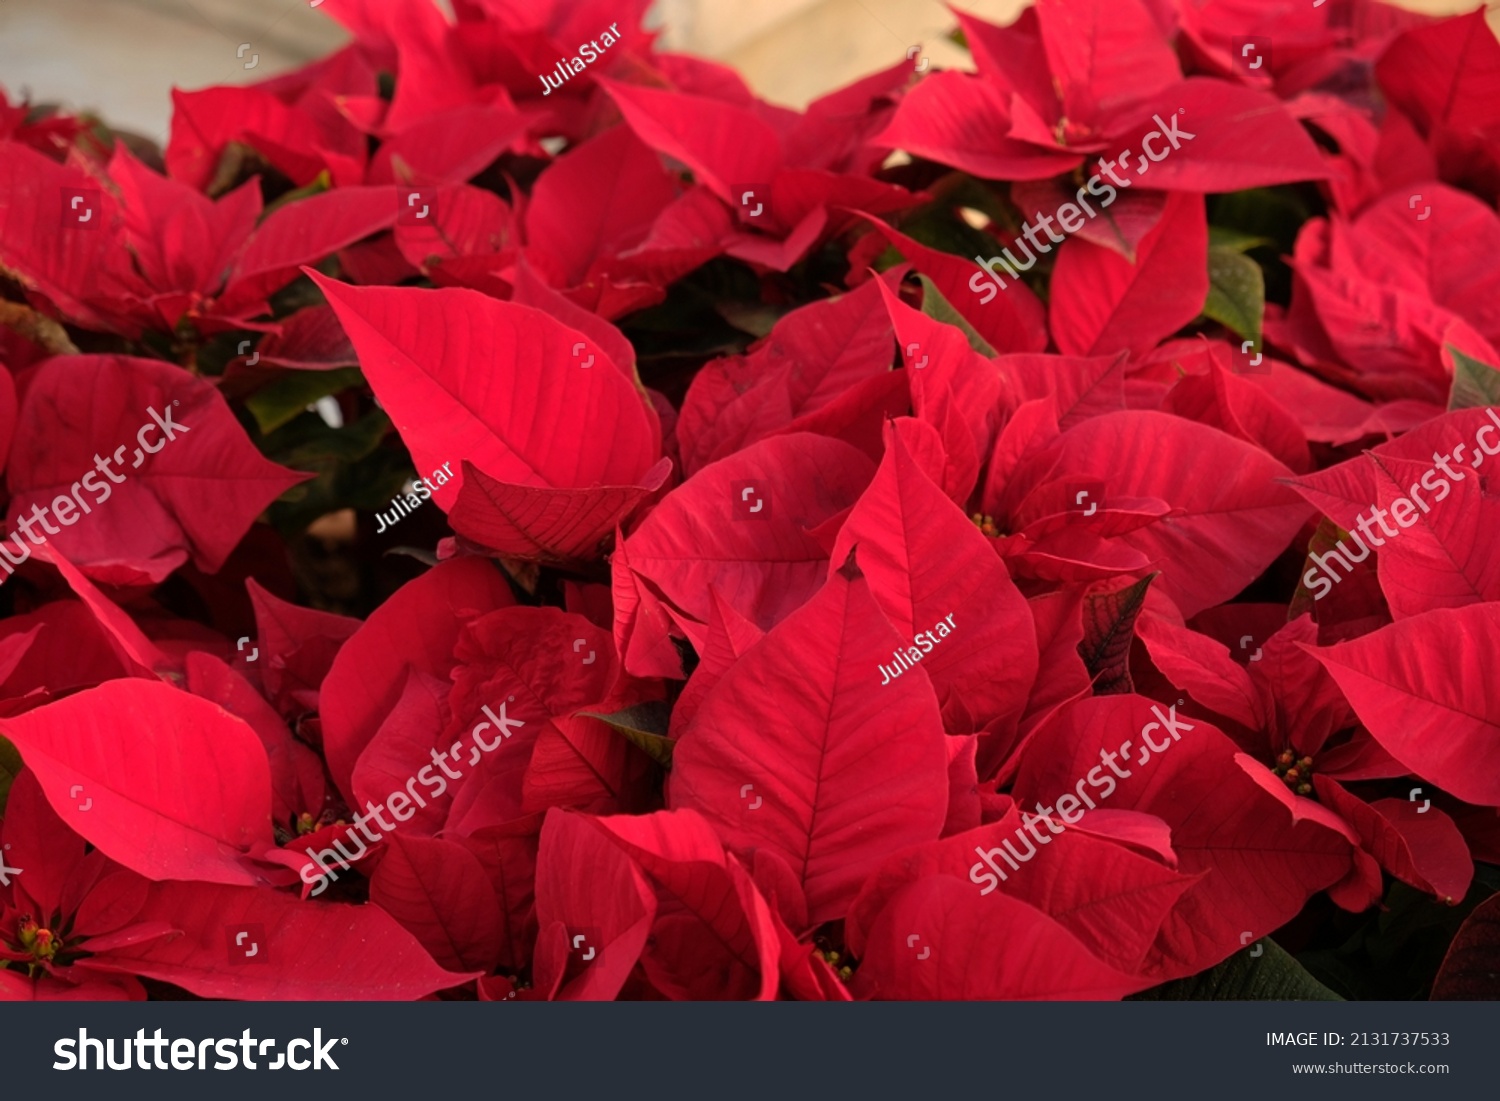 Close-up of red poinsettia flowers (Euphorbia pulcherrima). Red poinsettia, traditional colourful holiday pot plants, for sale in a garden centre. Group of red poinsettia plants. #2131737533